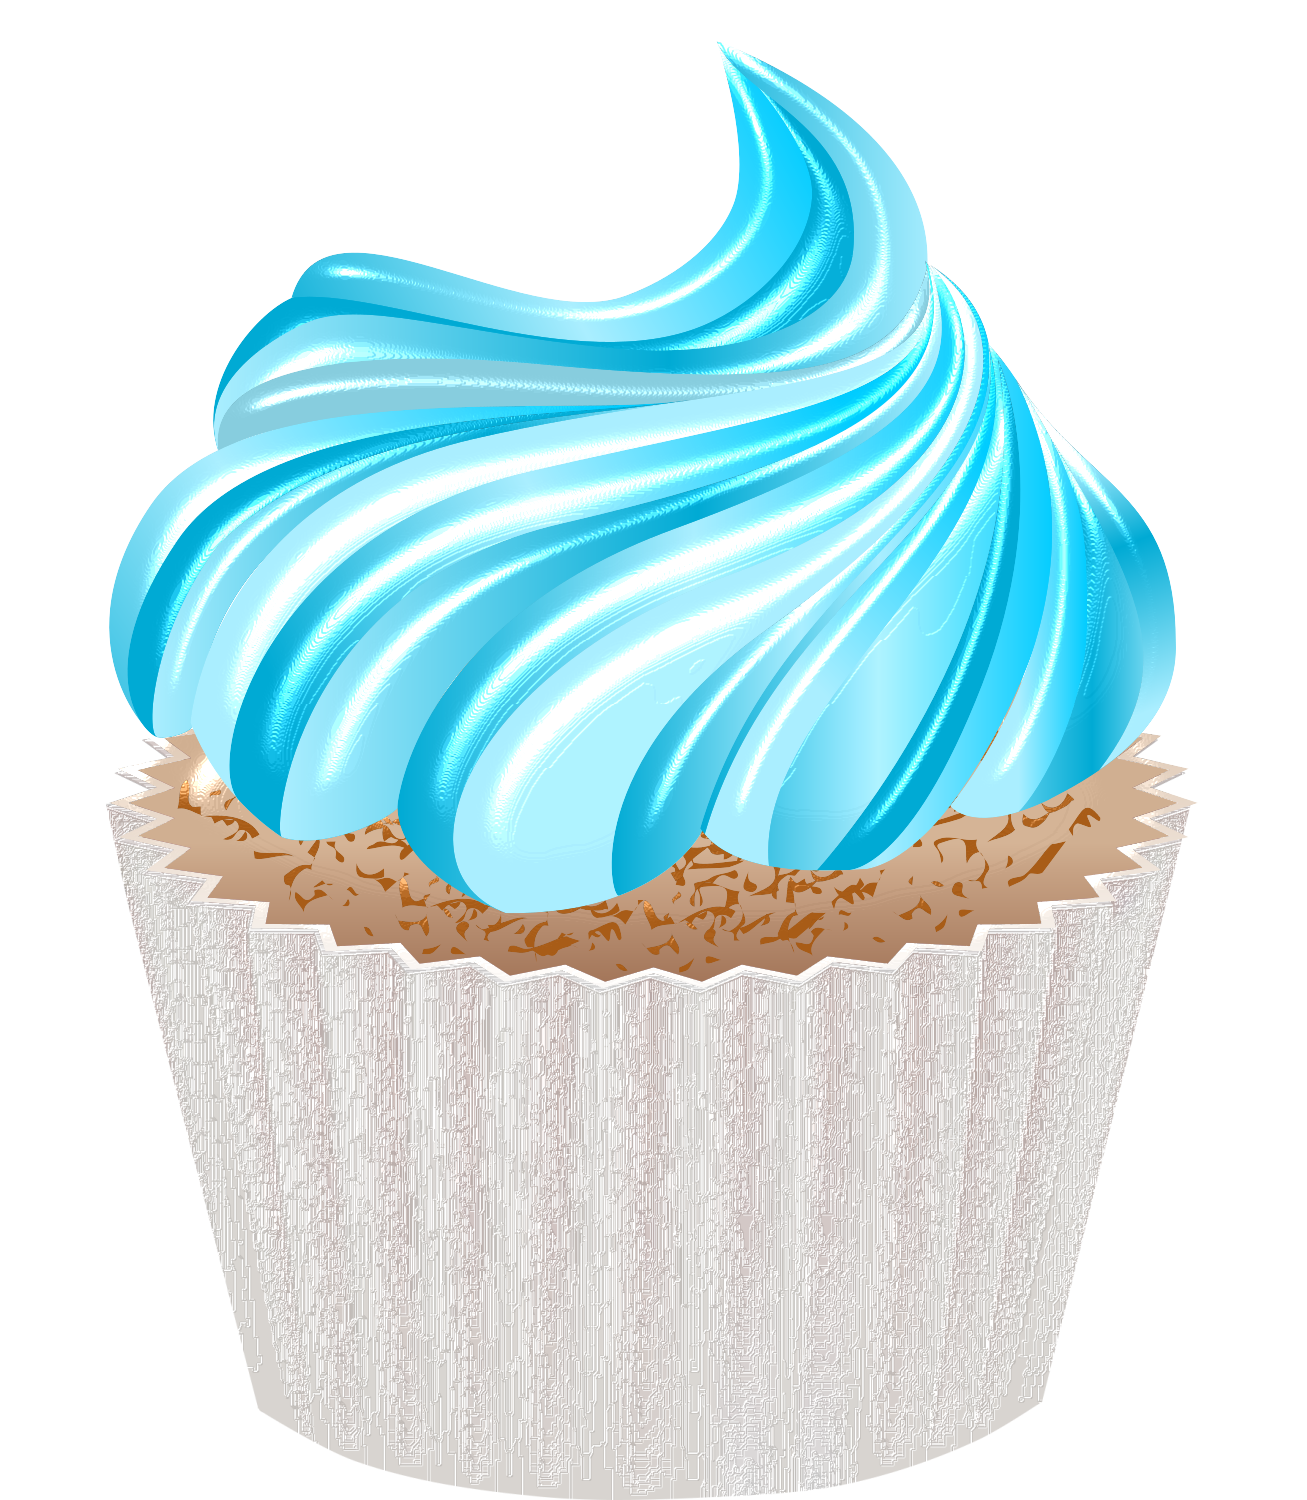  cupcake cake pinterest. Foods clipart charity